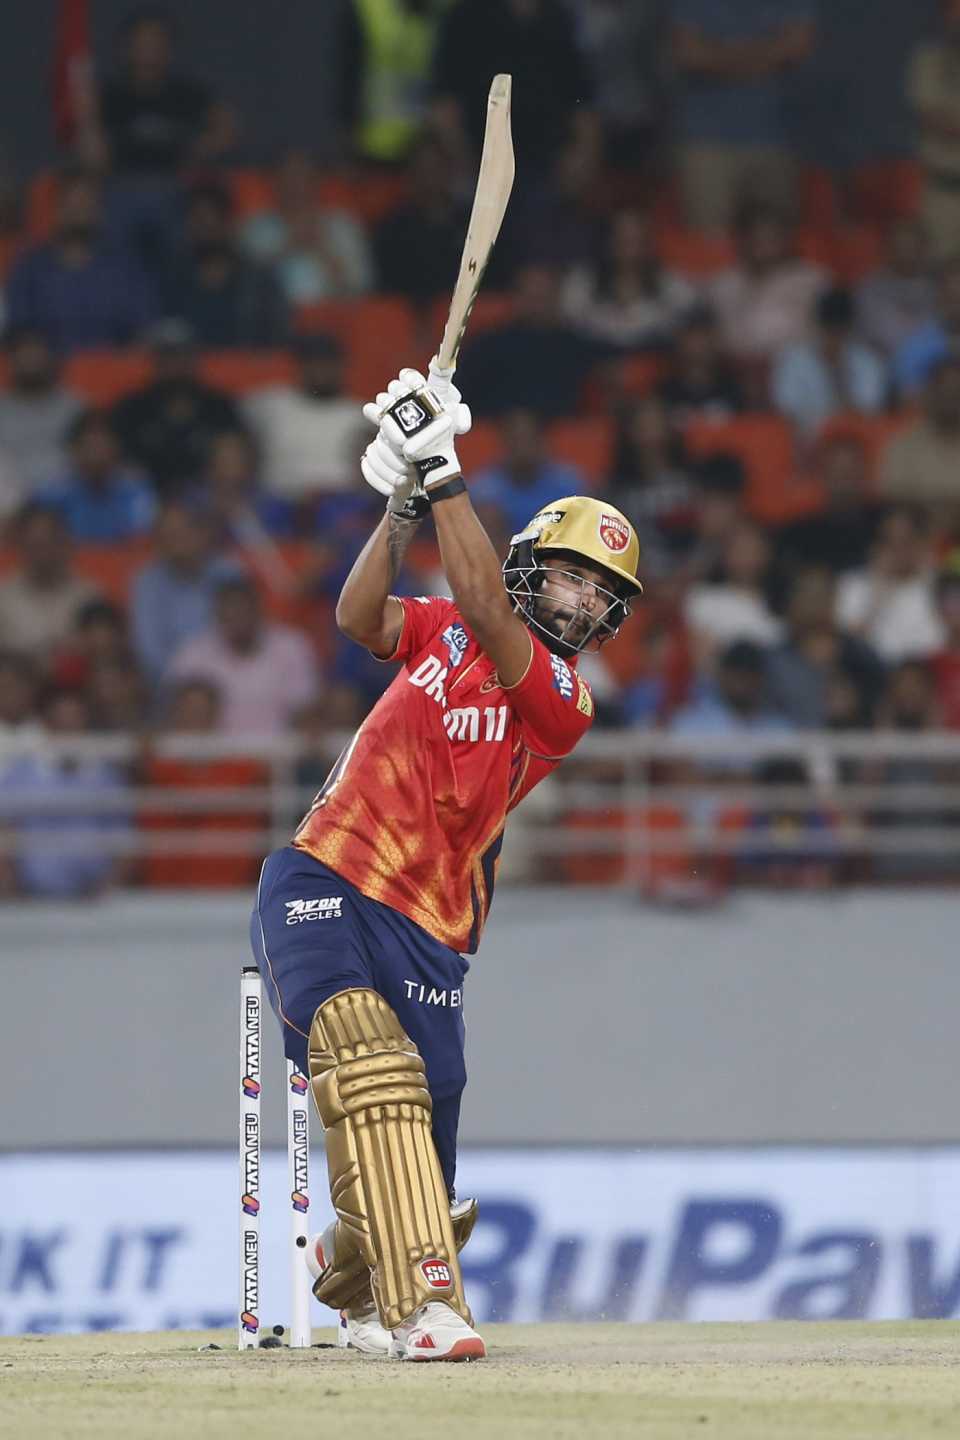 Harpreet Brar played his part in taking the game deep